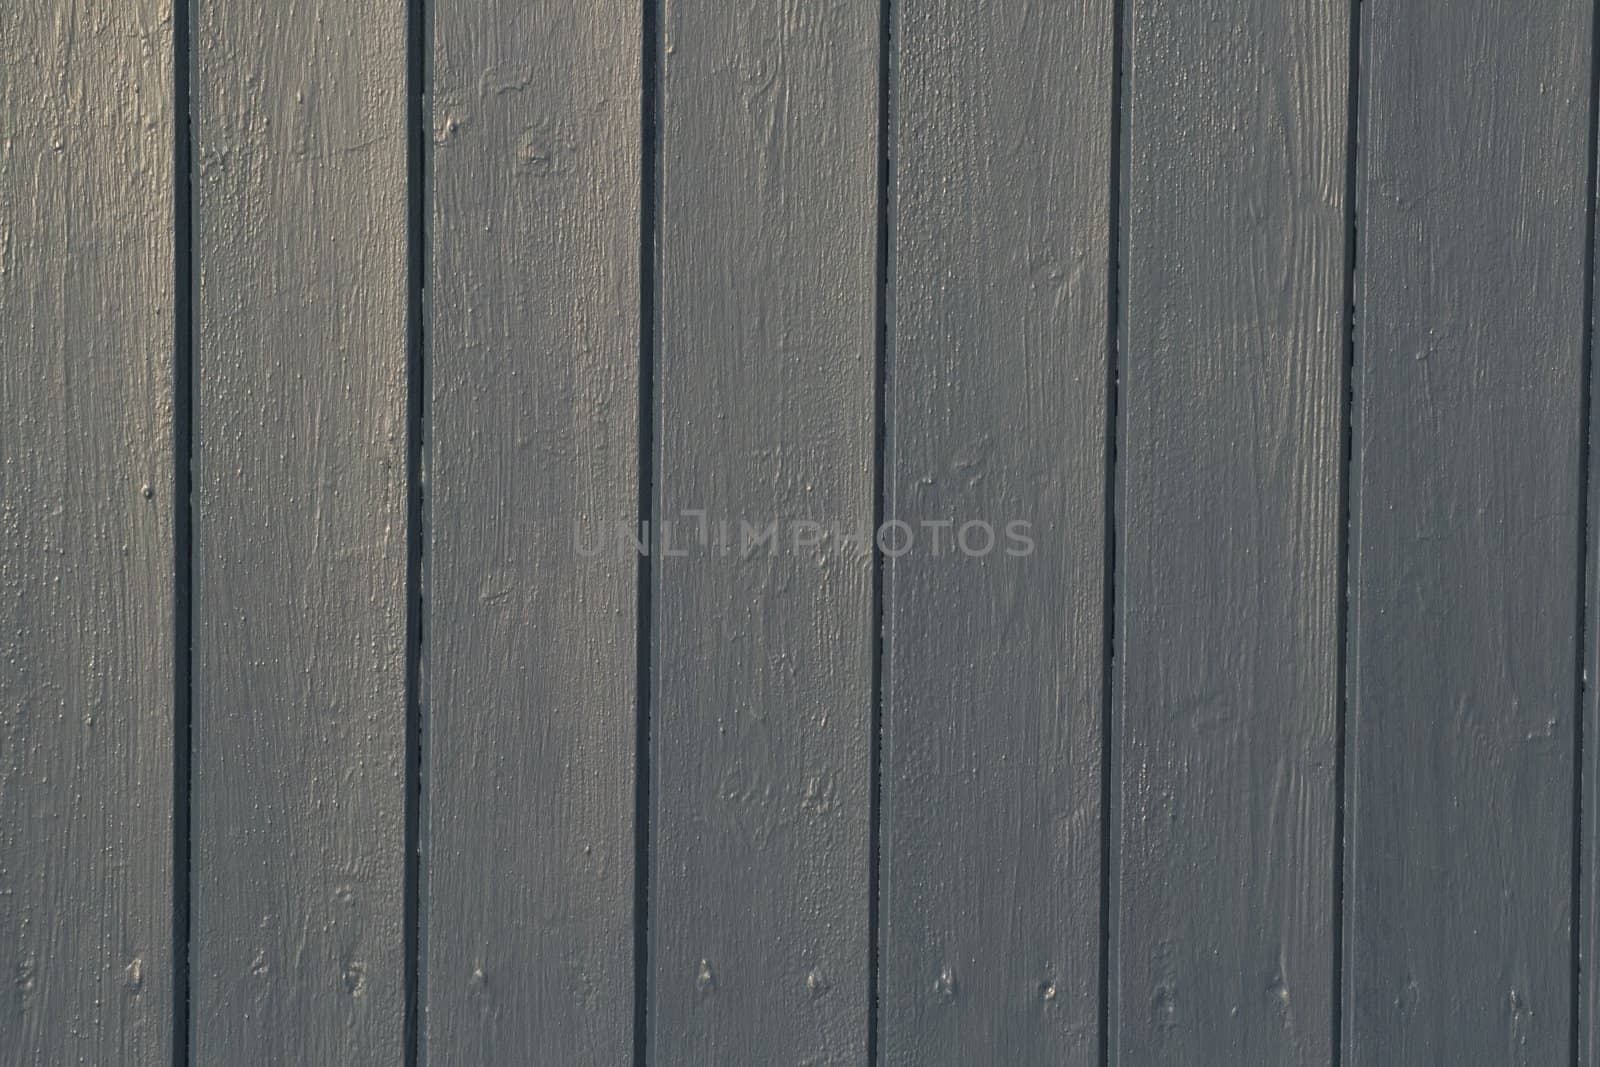 A painted wooden panel background, made up of 7 slats